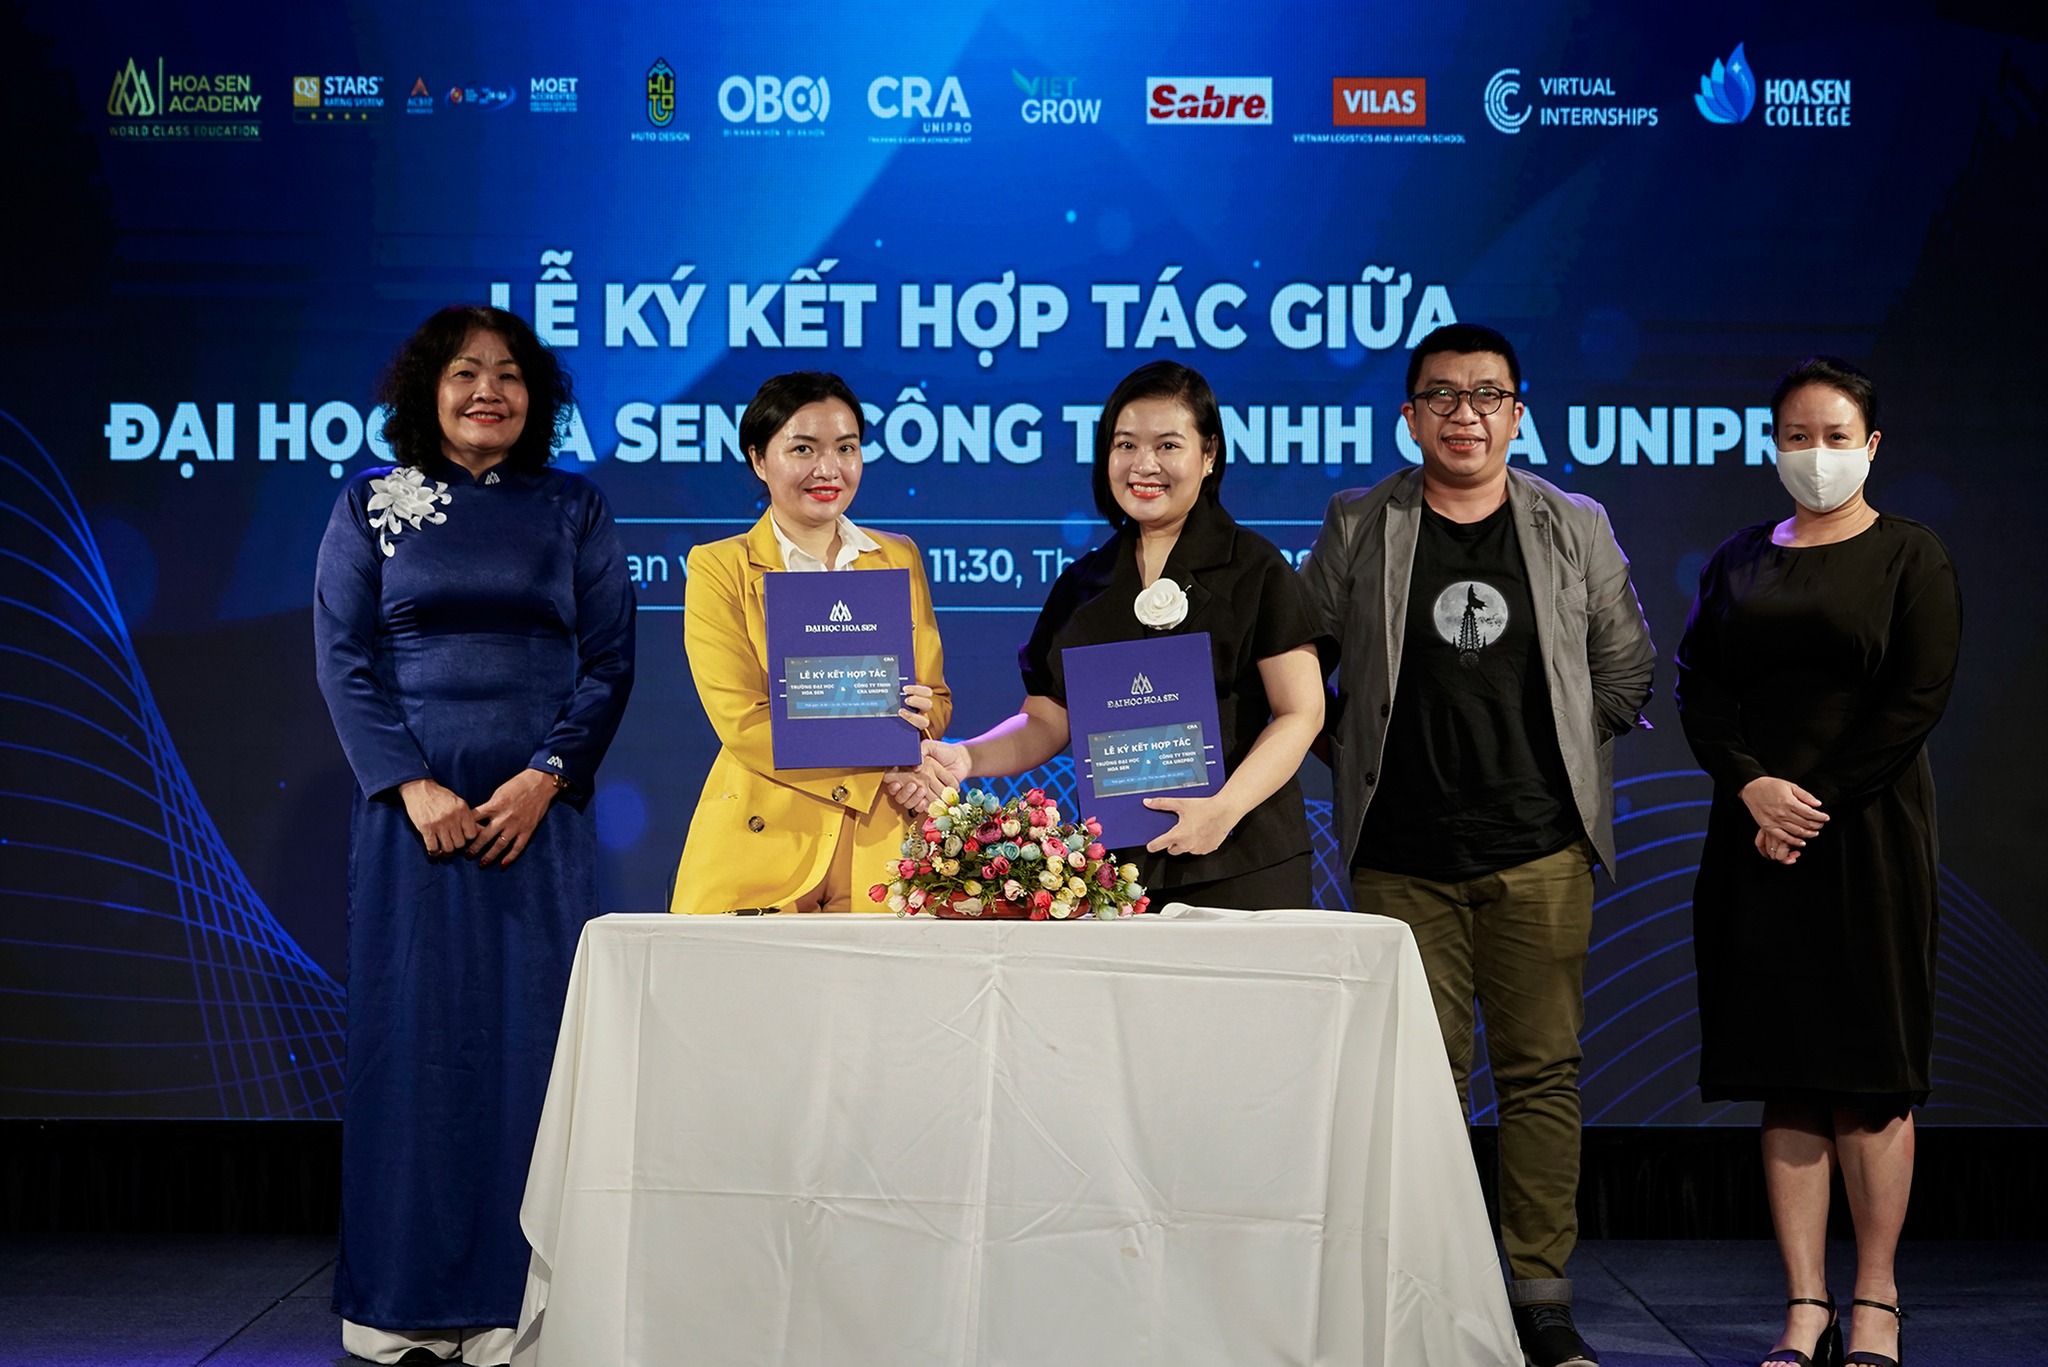 May be an image of 6 people, people standing, indoor and text that says 'STARS MOET H10DESCN OBC) CRA H GROW Sabre VILAS VIRTUAL INTERNSHIPS HOASEN COLLEGE ĐẠI HỌC Ễ KÝ KẾT HỢP TÁC GIỮA CÔNG T NHH SEN an 11:30, UNIPE'